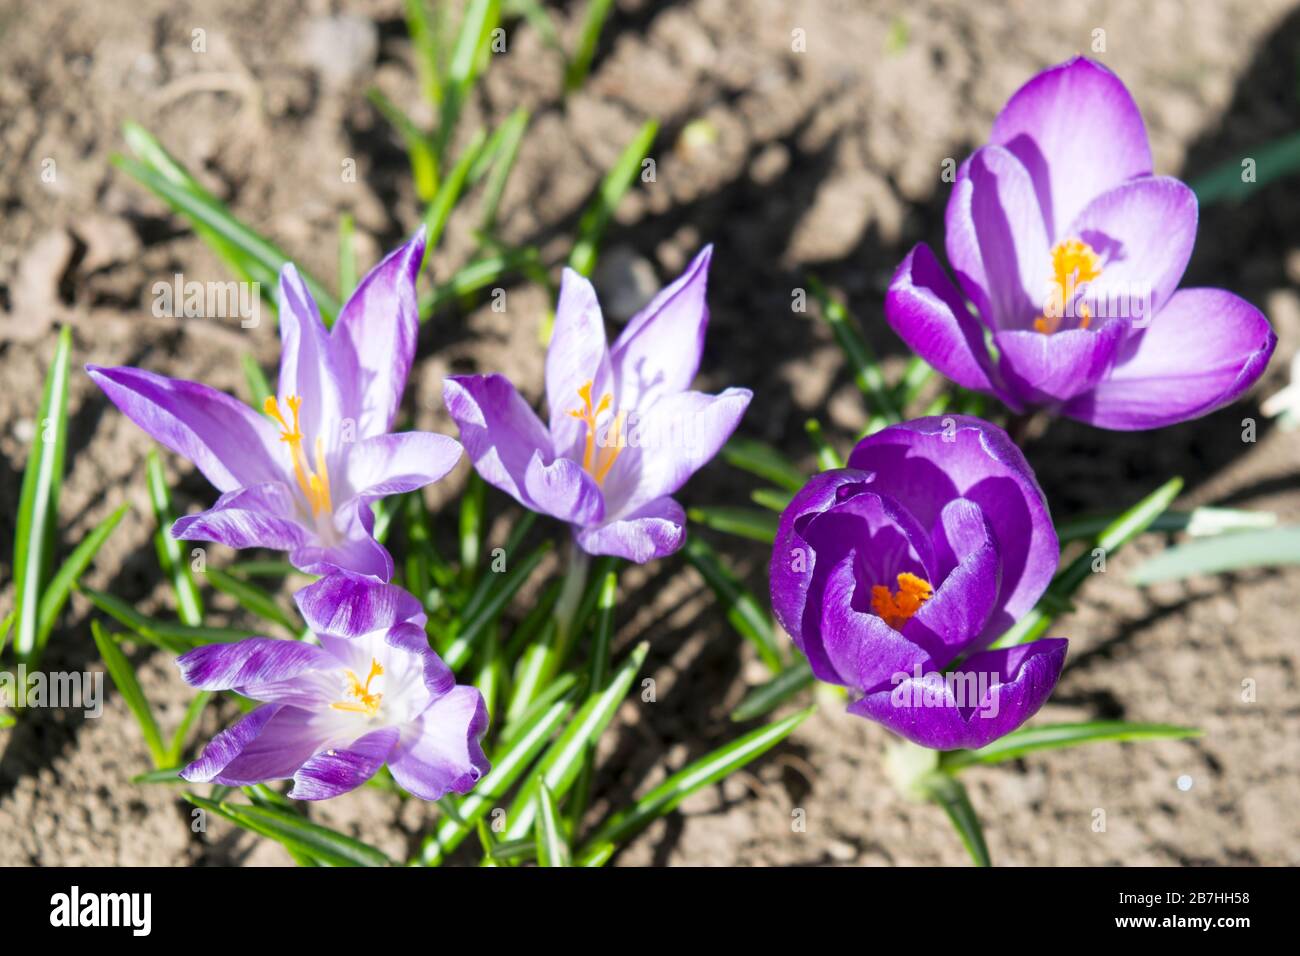 Purple crocus. It is a genus of flowering plants in the iris family comprising 90 species of perennials growing from corms. They are cultivated for th Stock Photo